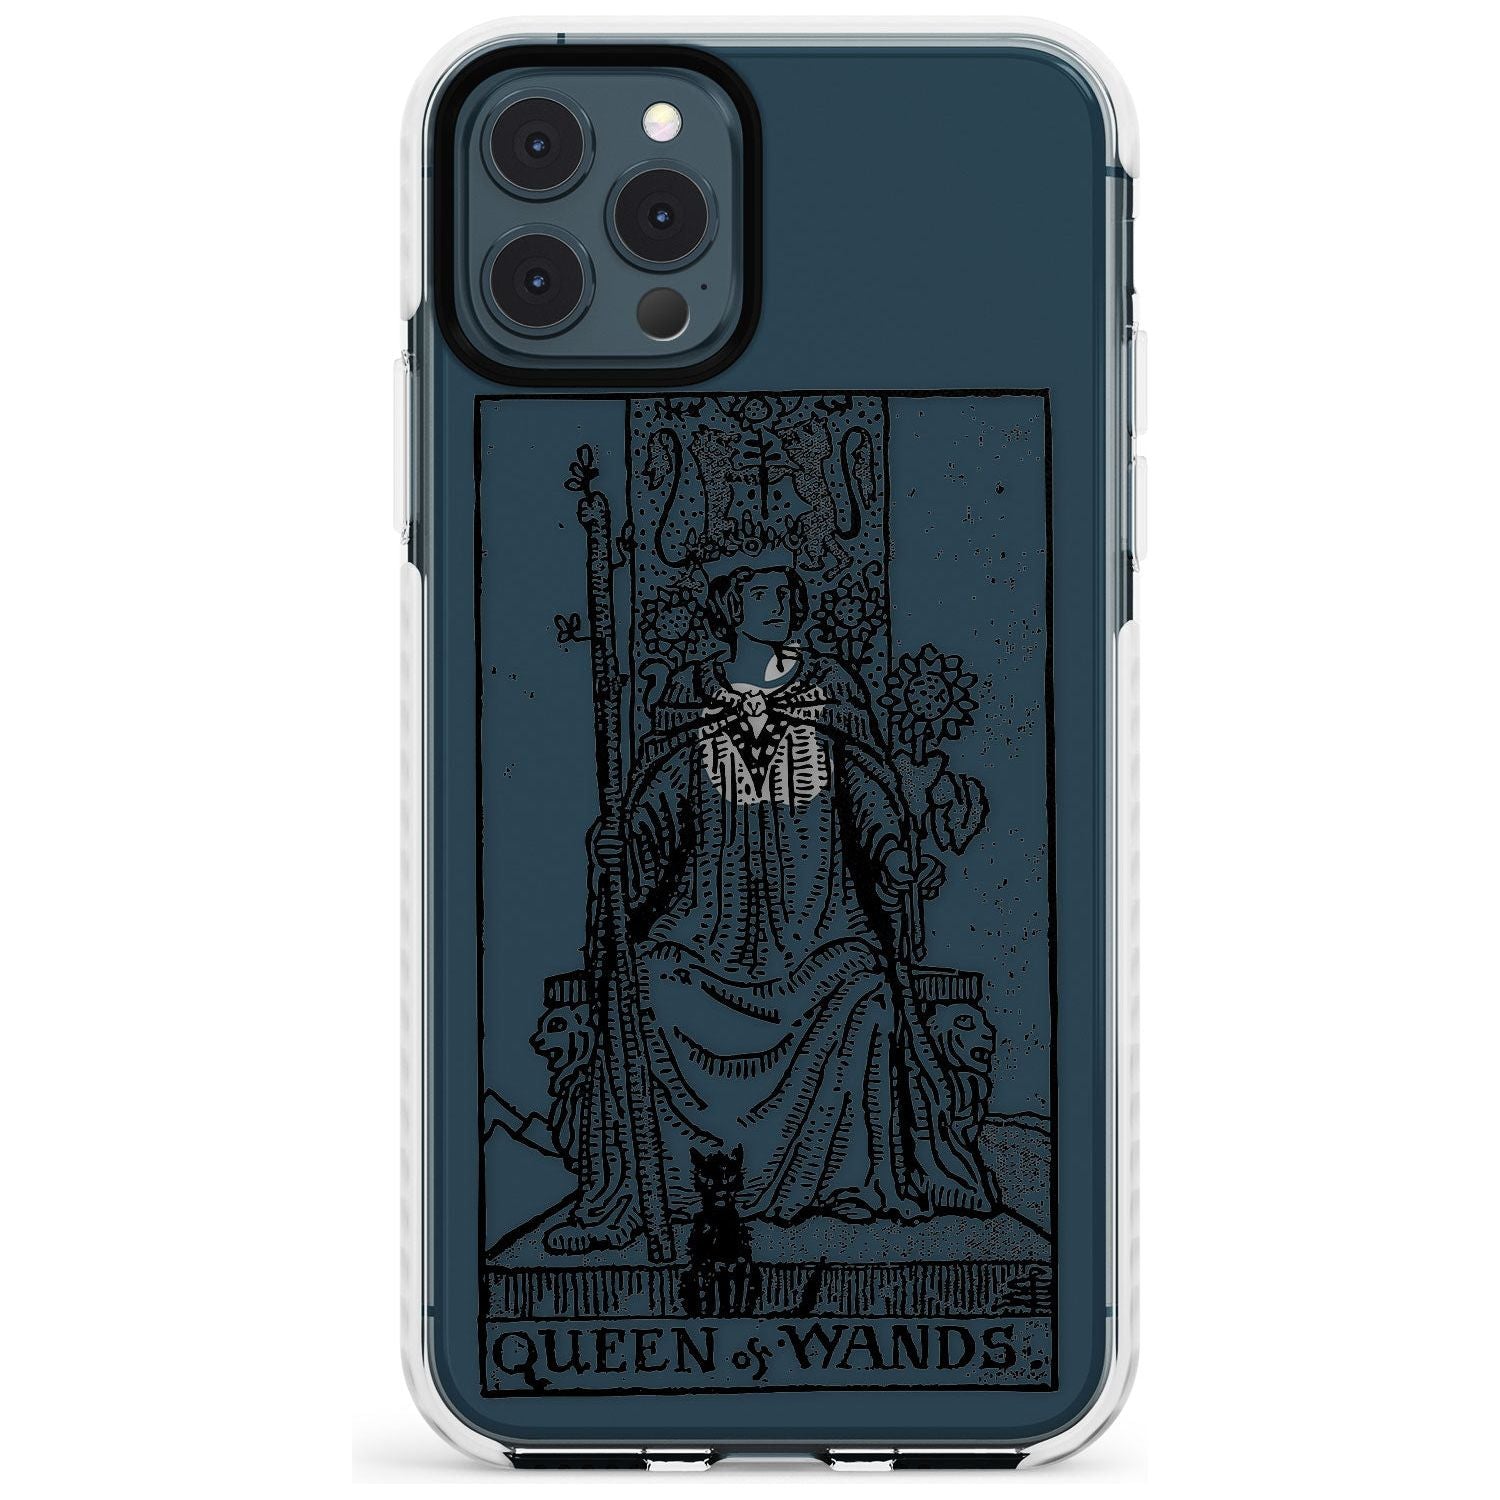 Queen of Wands Tarot Card - Transparent Slim TPU Phone Case for iPhone 11 Pro Max